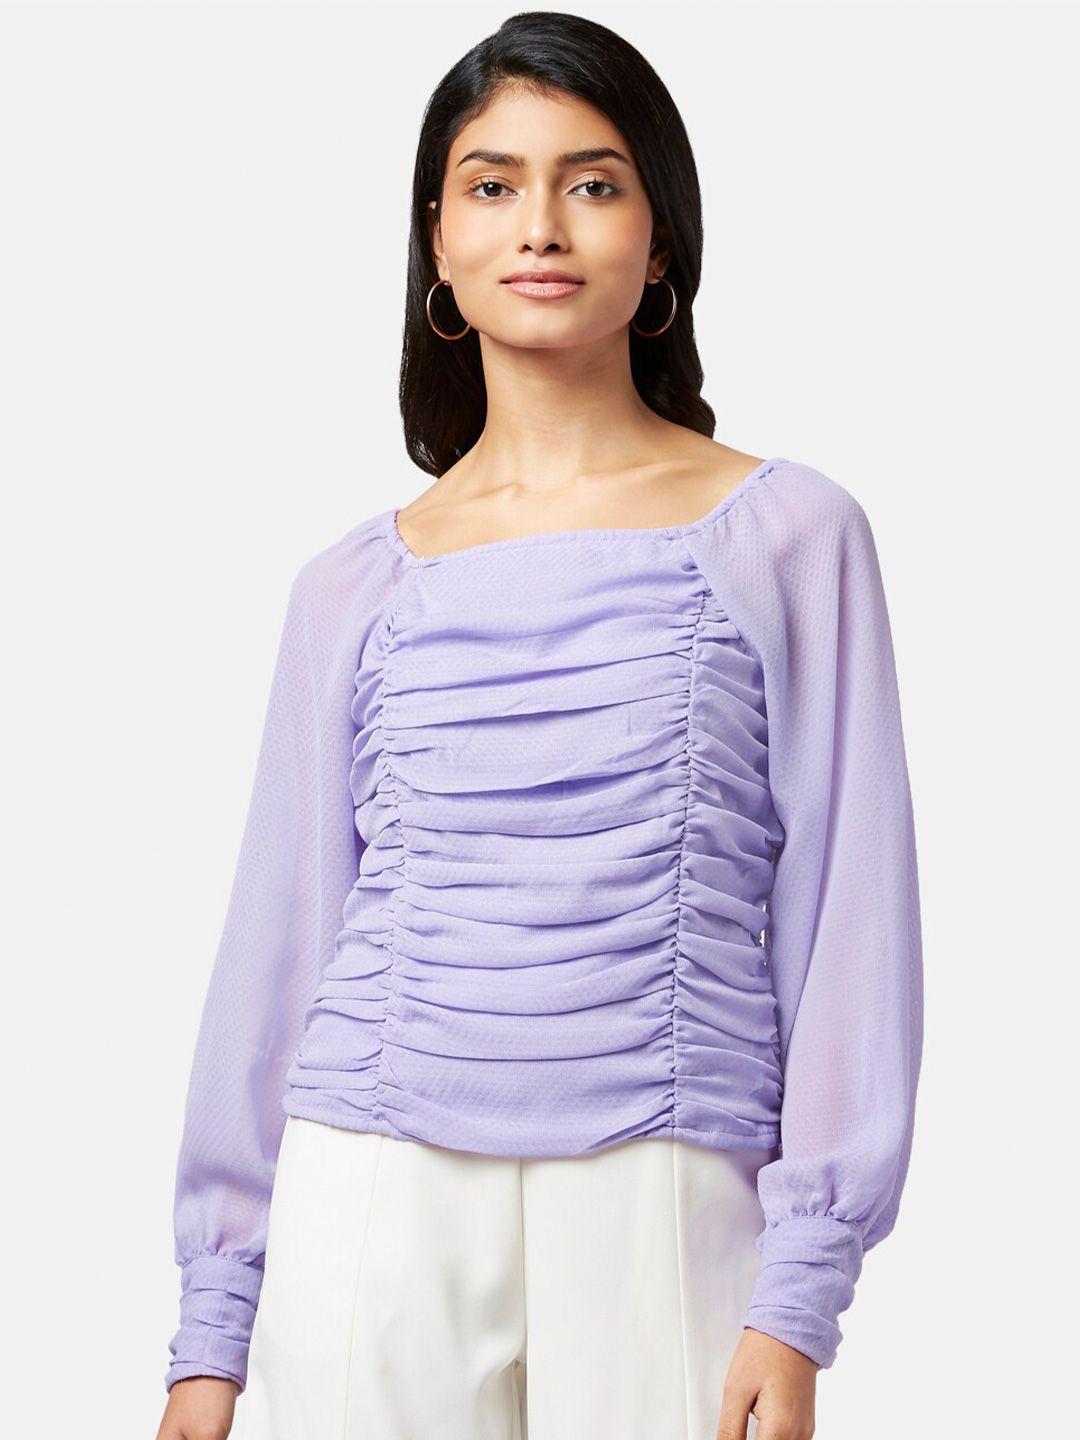 honey by pantaloons women cuffed sleeves lavender top